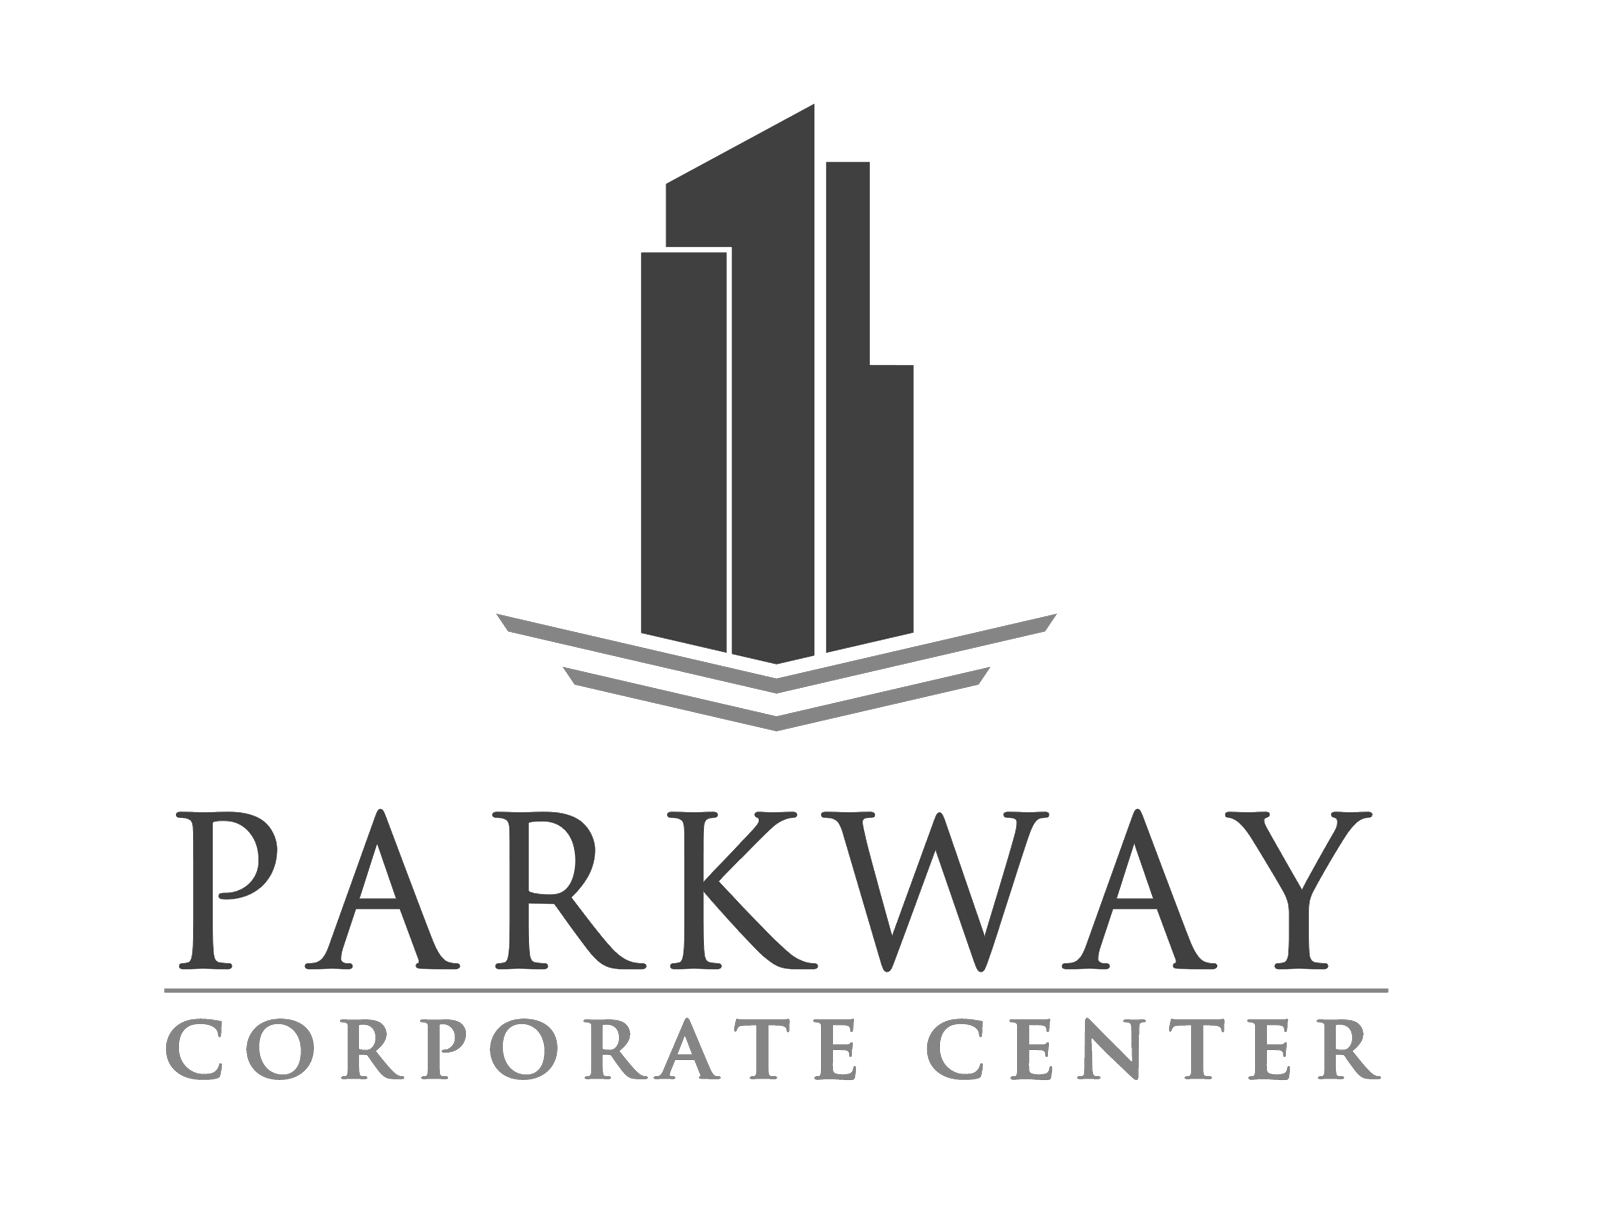 PARKWAY CORPORATE CENTER